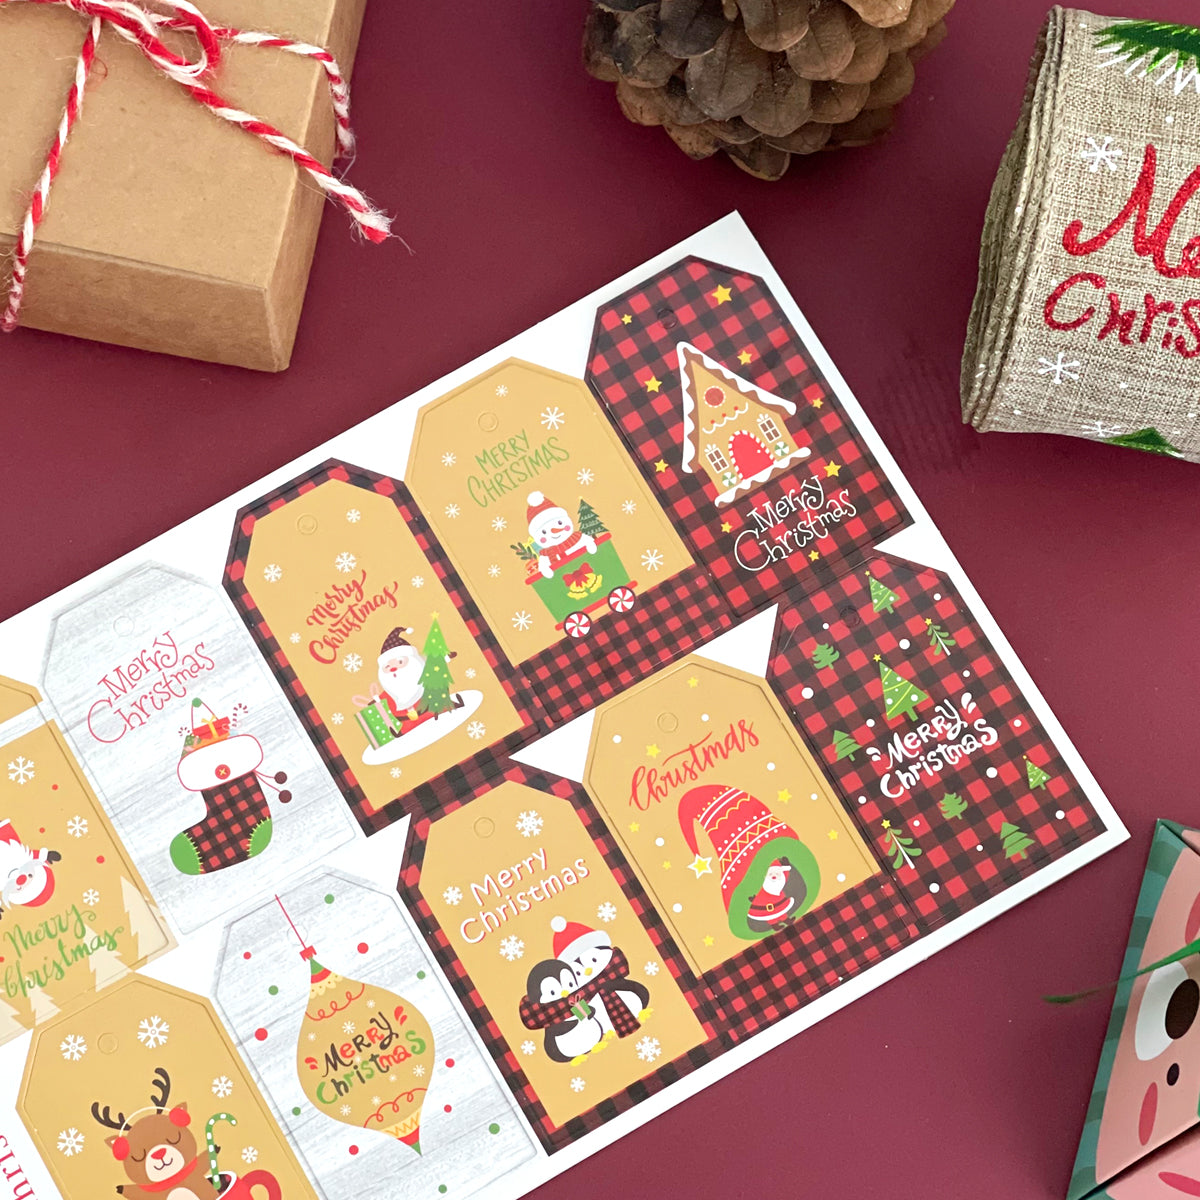 Wrapables Fun & Festive Christmas Holiday Gift Tags/Kraft Paper Hang Tags for Gift-Wrapping, Labelling, Package Decoration, (50pcs)